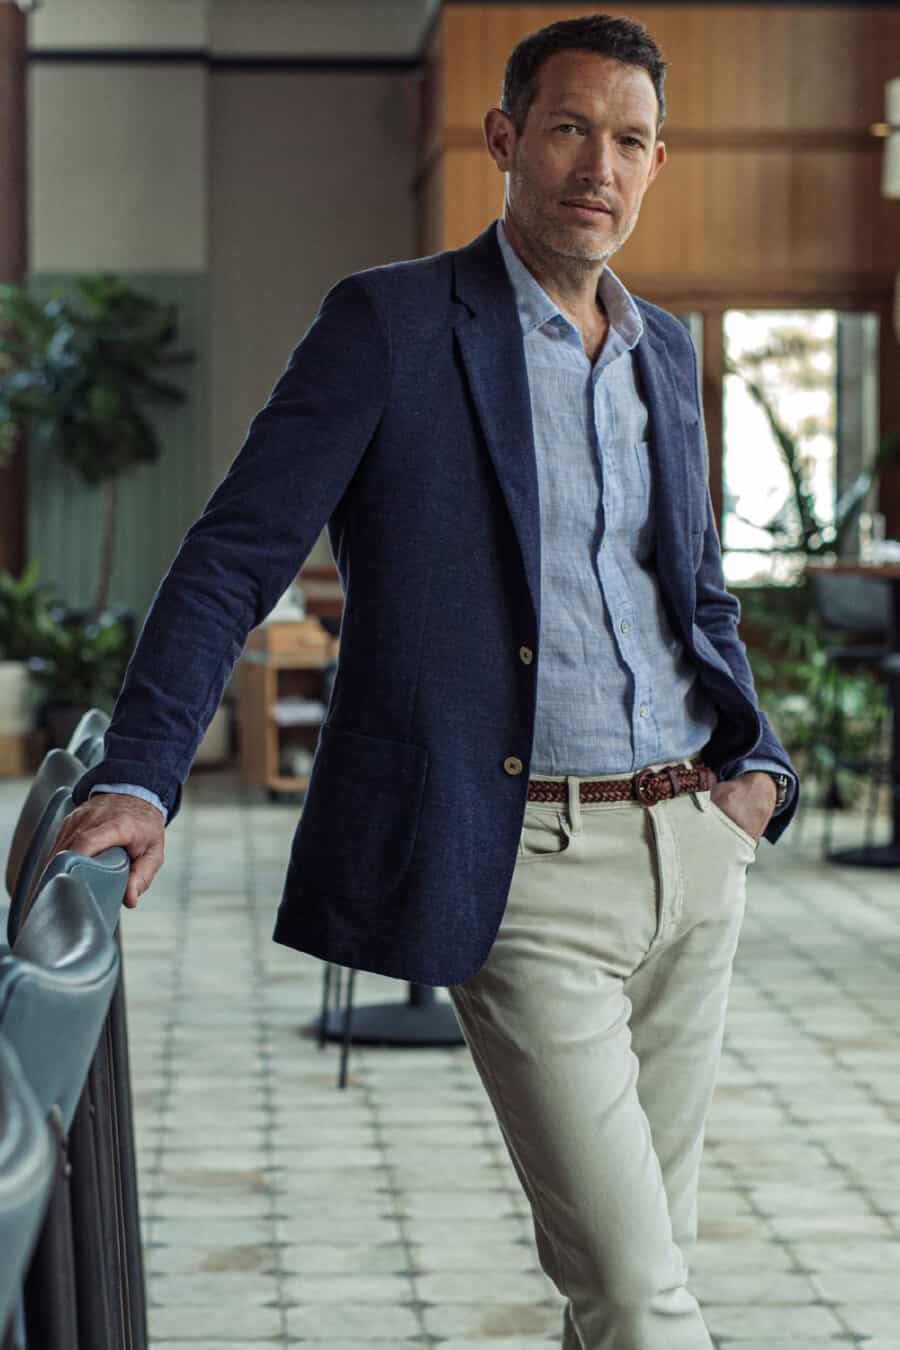 Men's light grey jeans, blue chambray shirt and navy blazer outfit